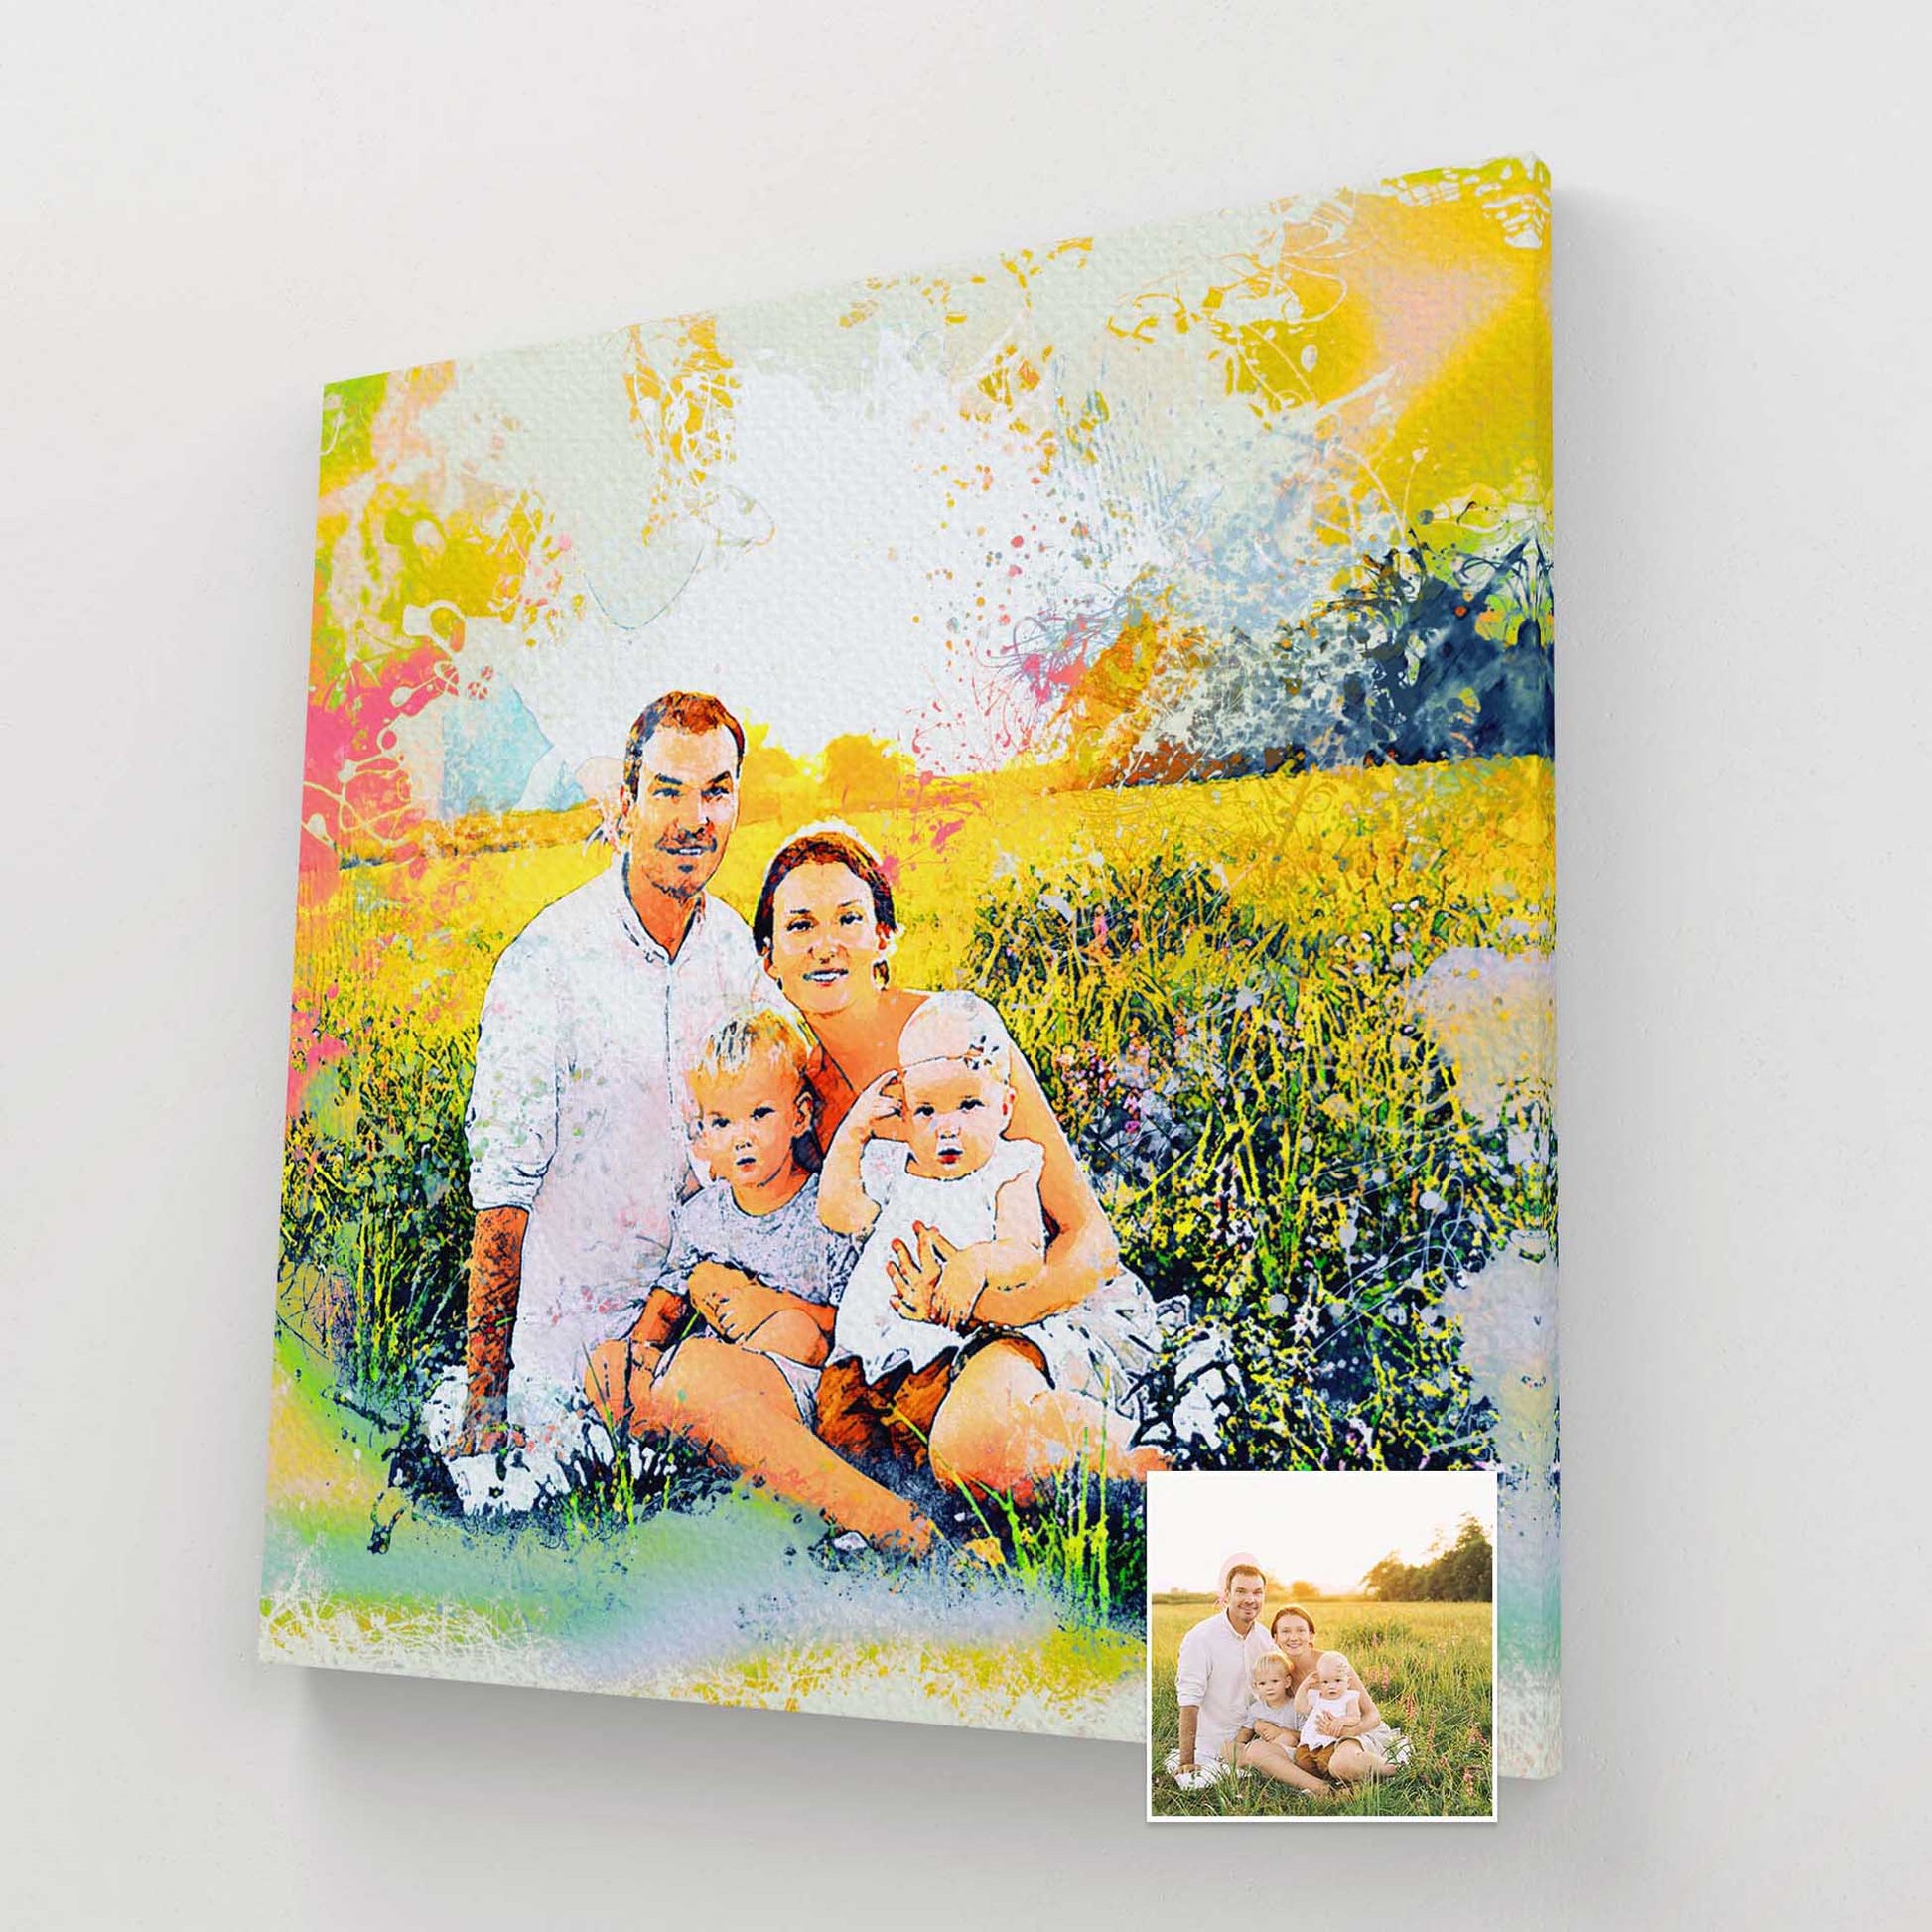 Transform your space into a vibrant oasis of color and joy with a personalized Splash Watercolor Canvas